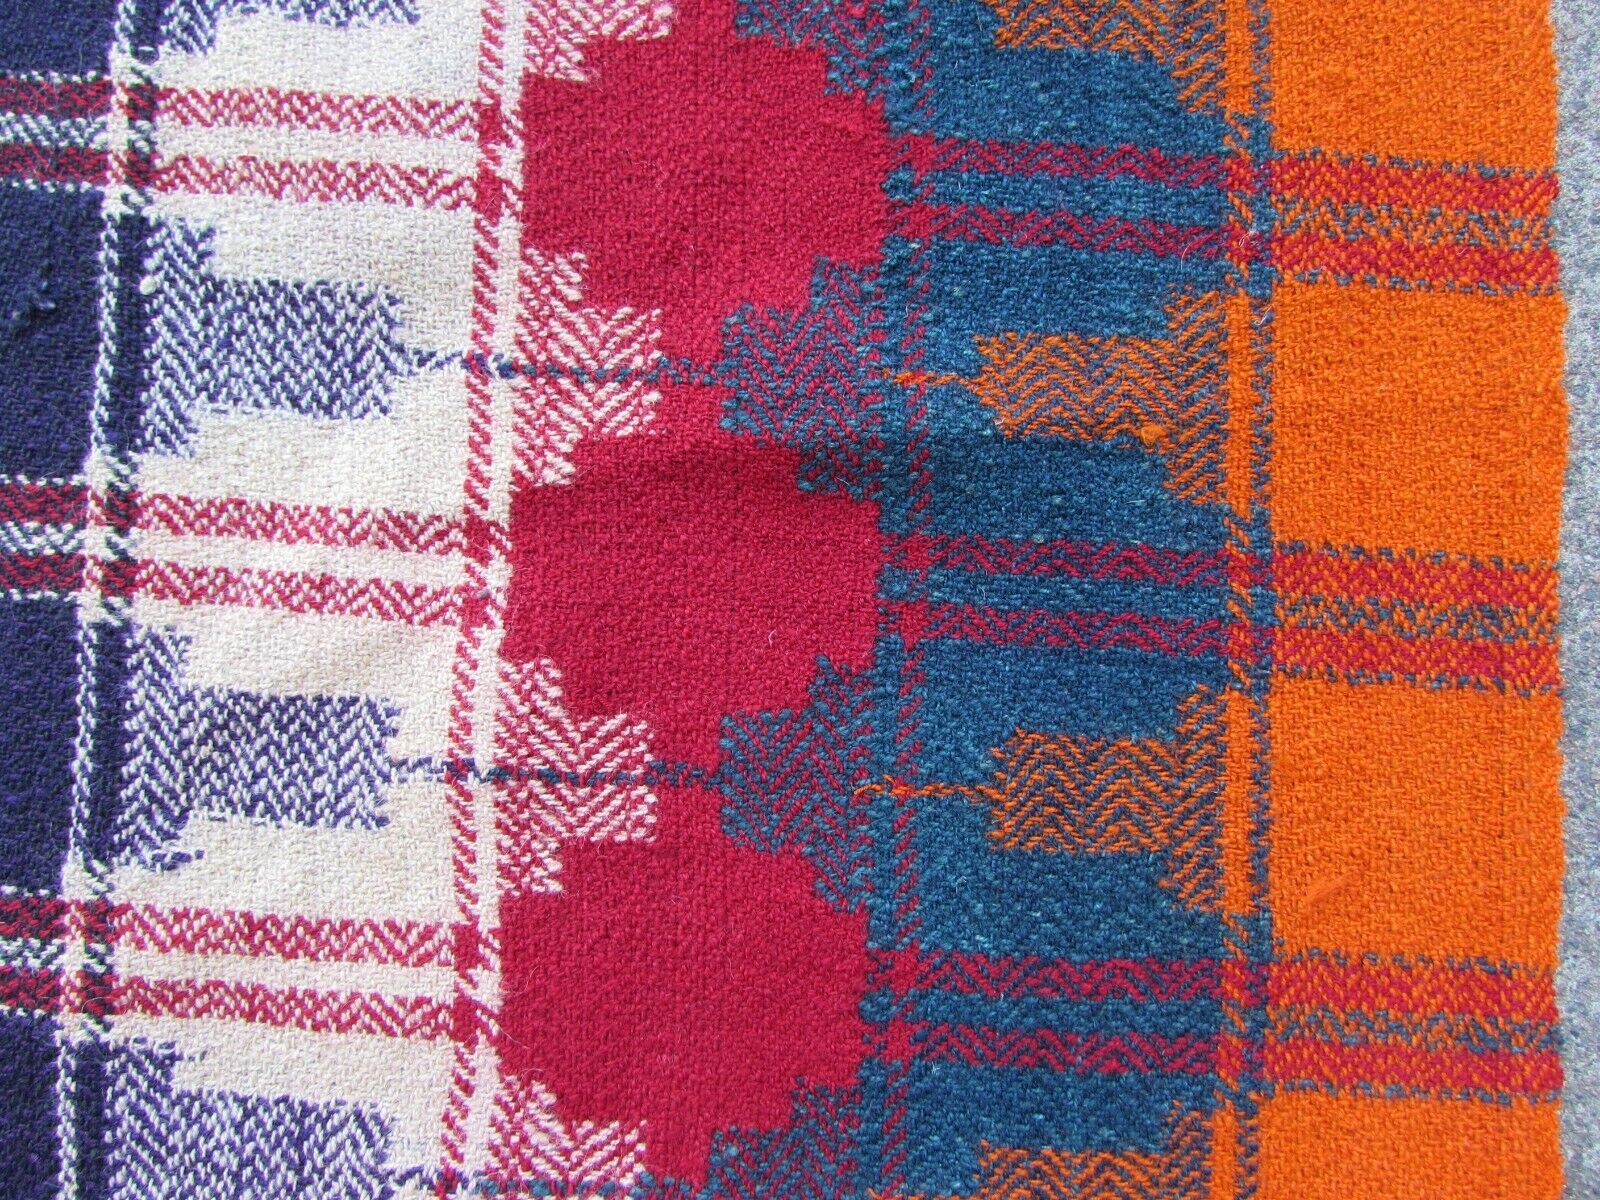 Handmade vintage Persian Moj kilim in colorful shades made in stripes. The Moj is made as a throw, usually made from two or few narrower piece, nearly identical (you able to undo the joint in middle and use it as a curtain) one of the panel is shorter than others. The Moj is crooked and is not perfectly rectangular or evenly straight due to being handmade.